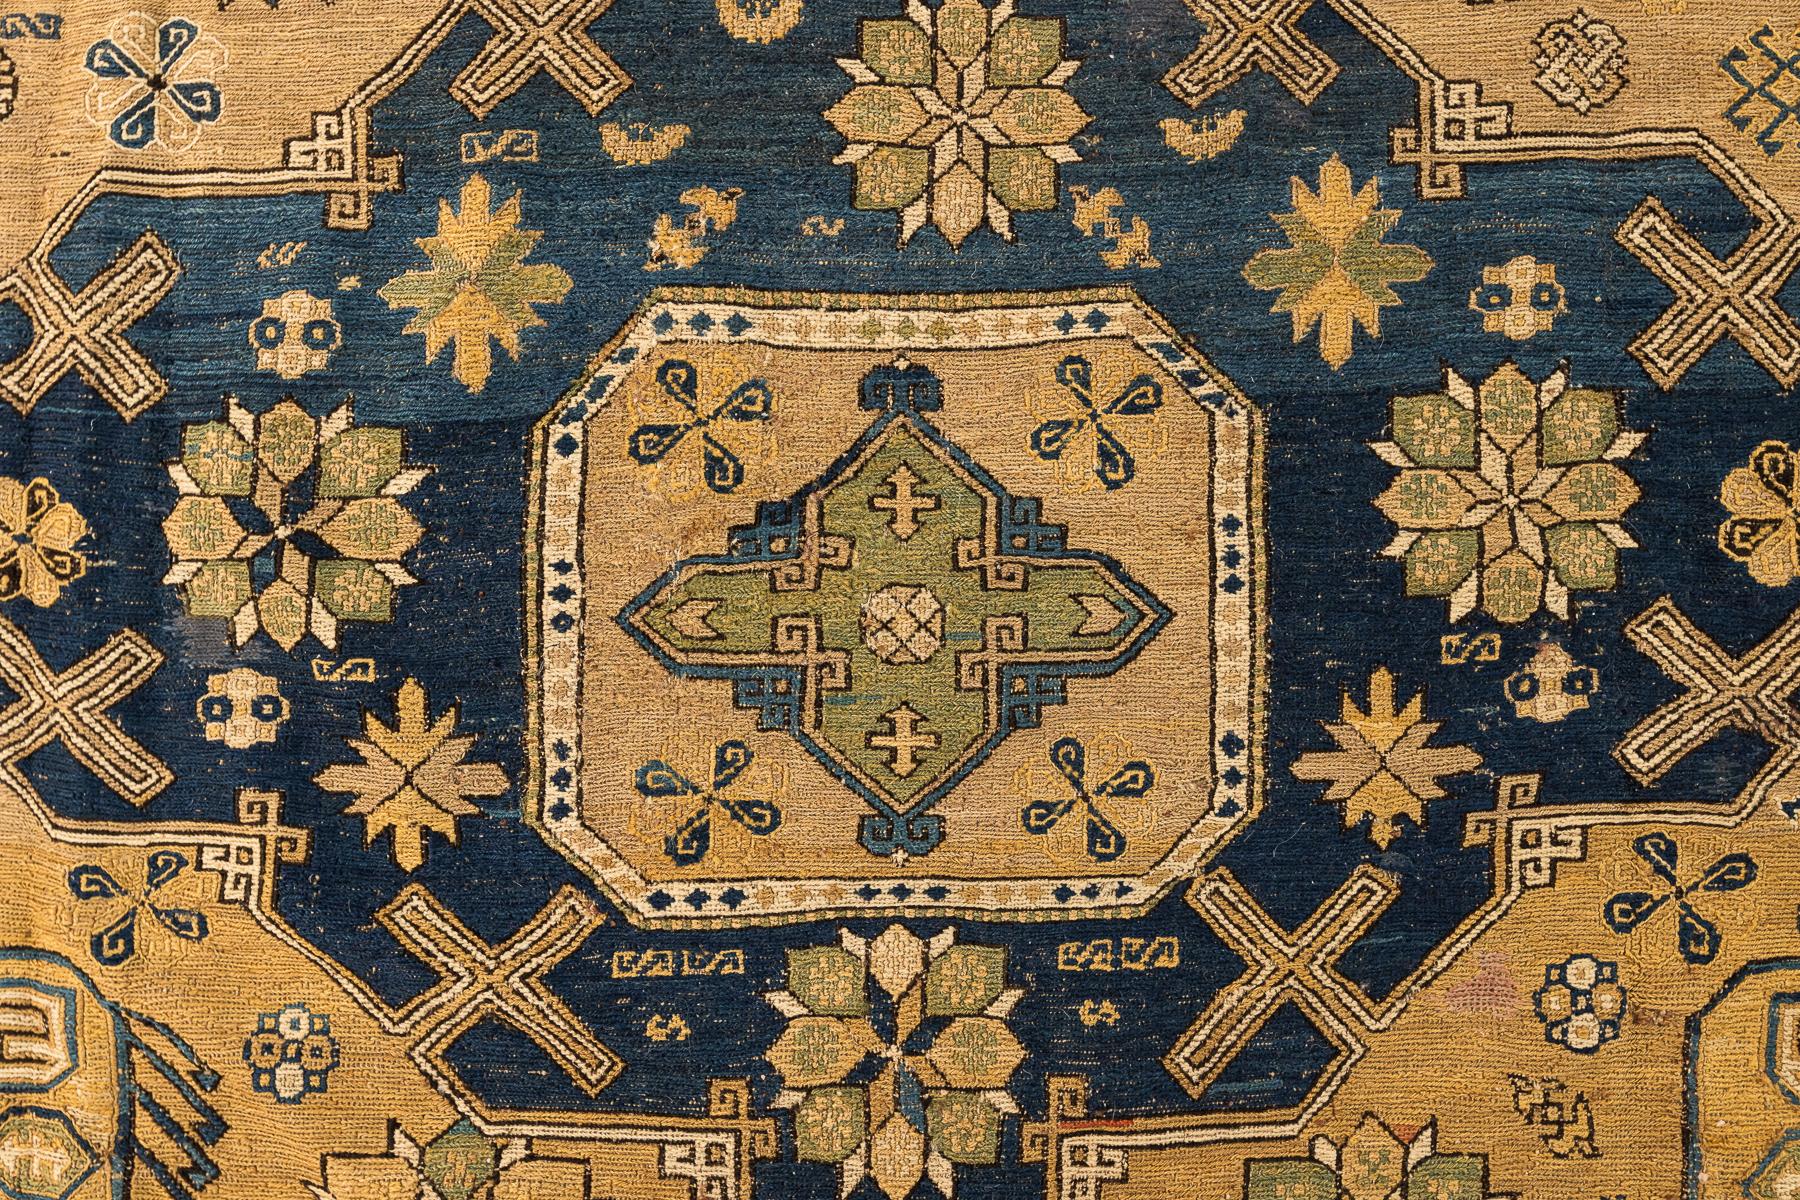 Soumak – Caucasus

This is a beautiful rug made in the Caucasian Mountains that features a geometric pattern perfect for design styles ranging from classic to contemporary. The colours blend to create an elegant, rich and sophisticated look. This